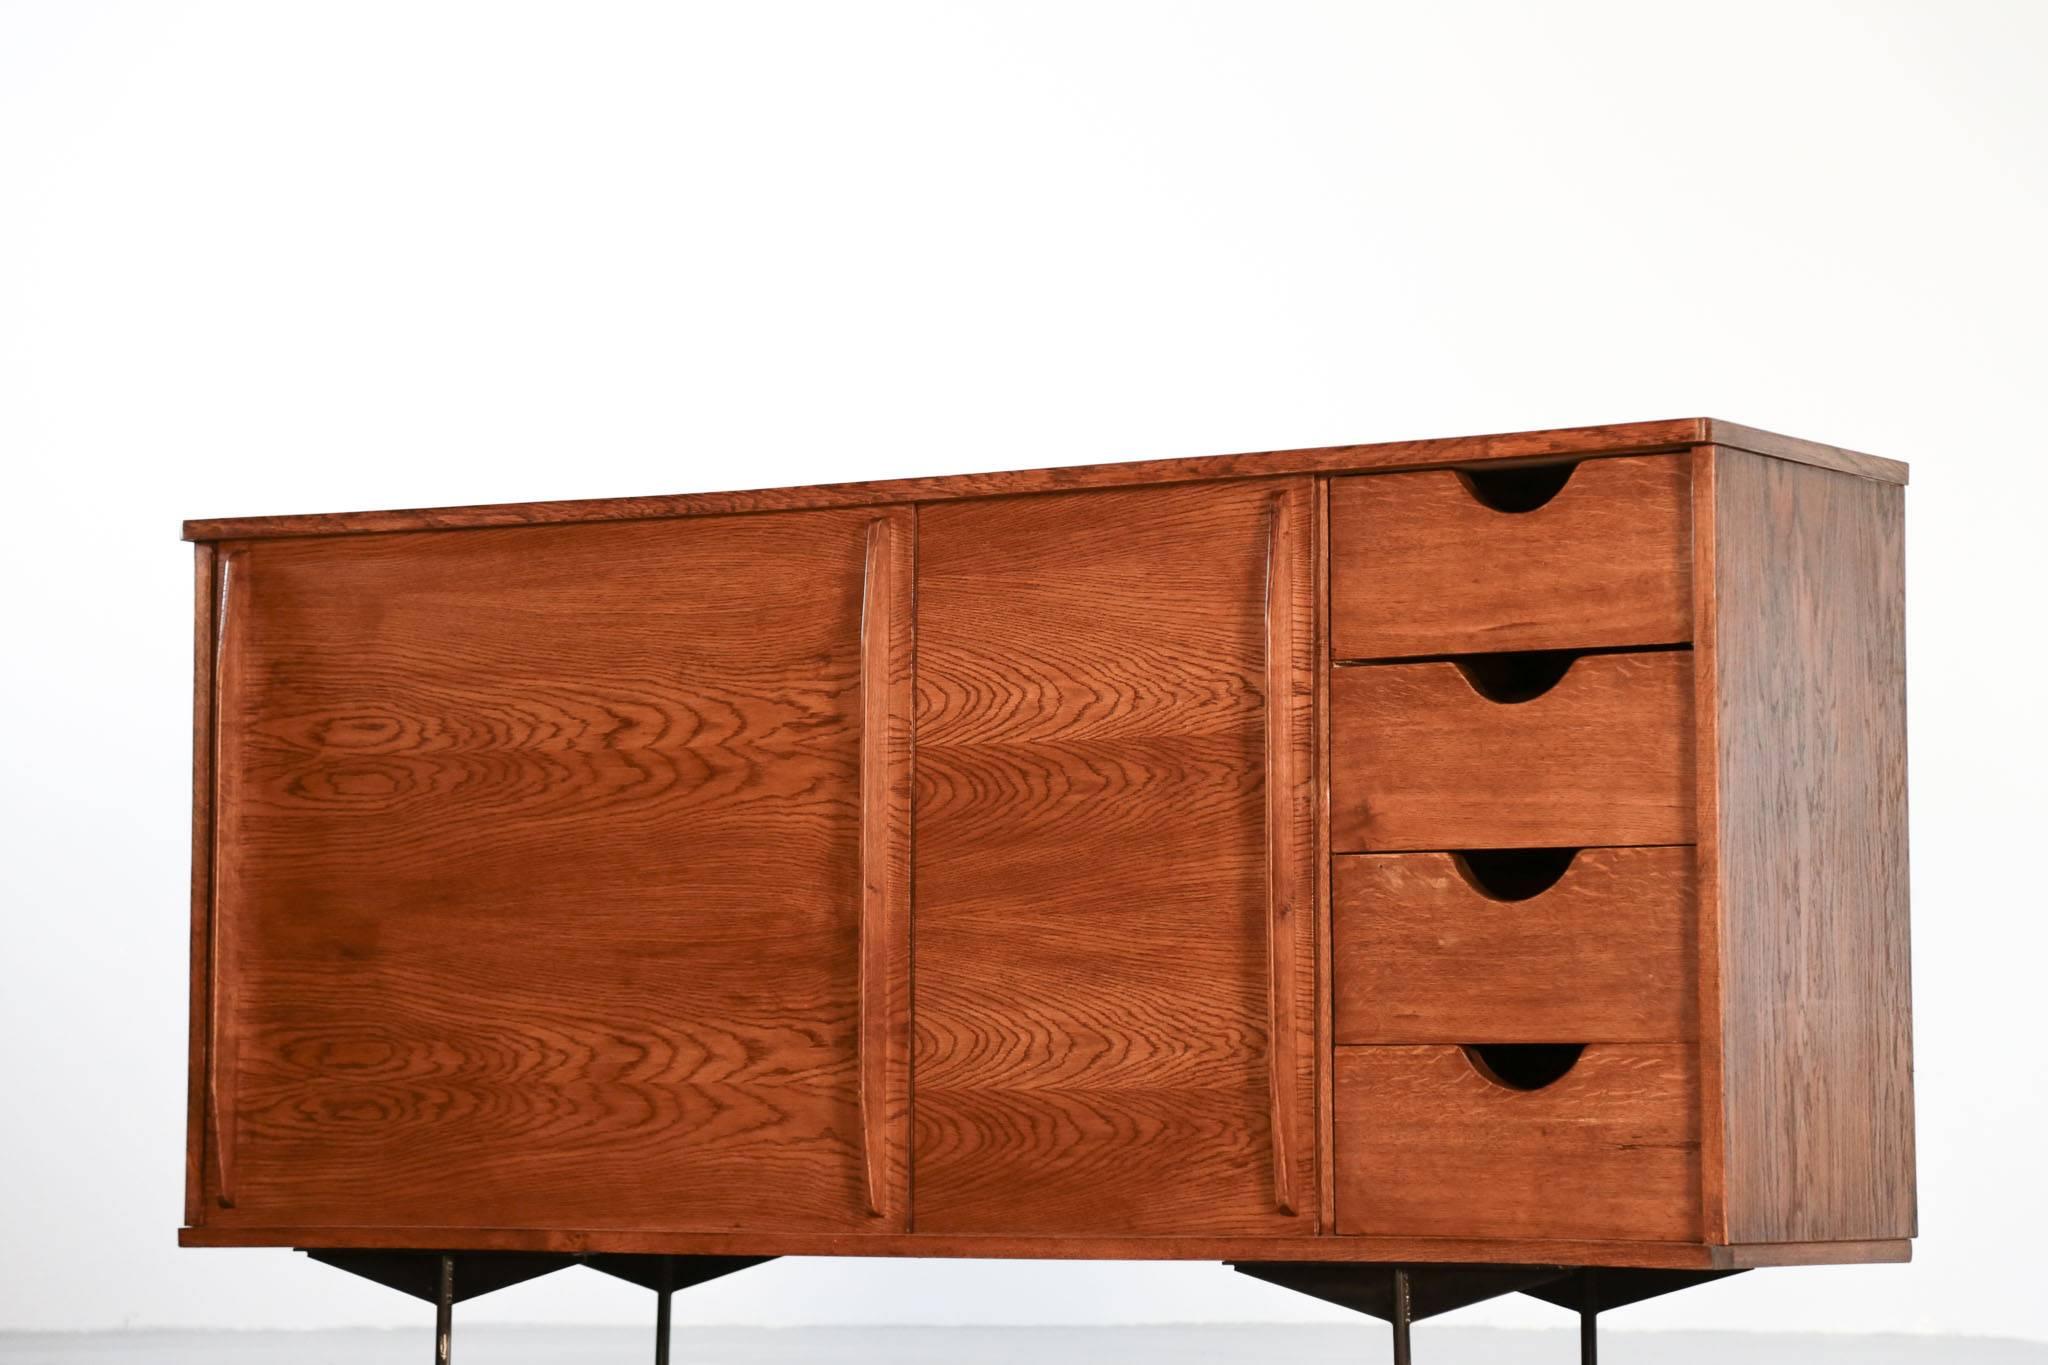 Iron Sideboard in Style of Jean Prouvé Design, 1960 Oak